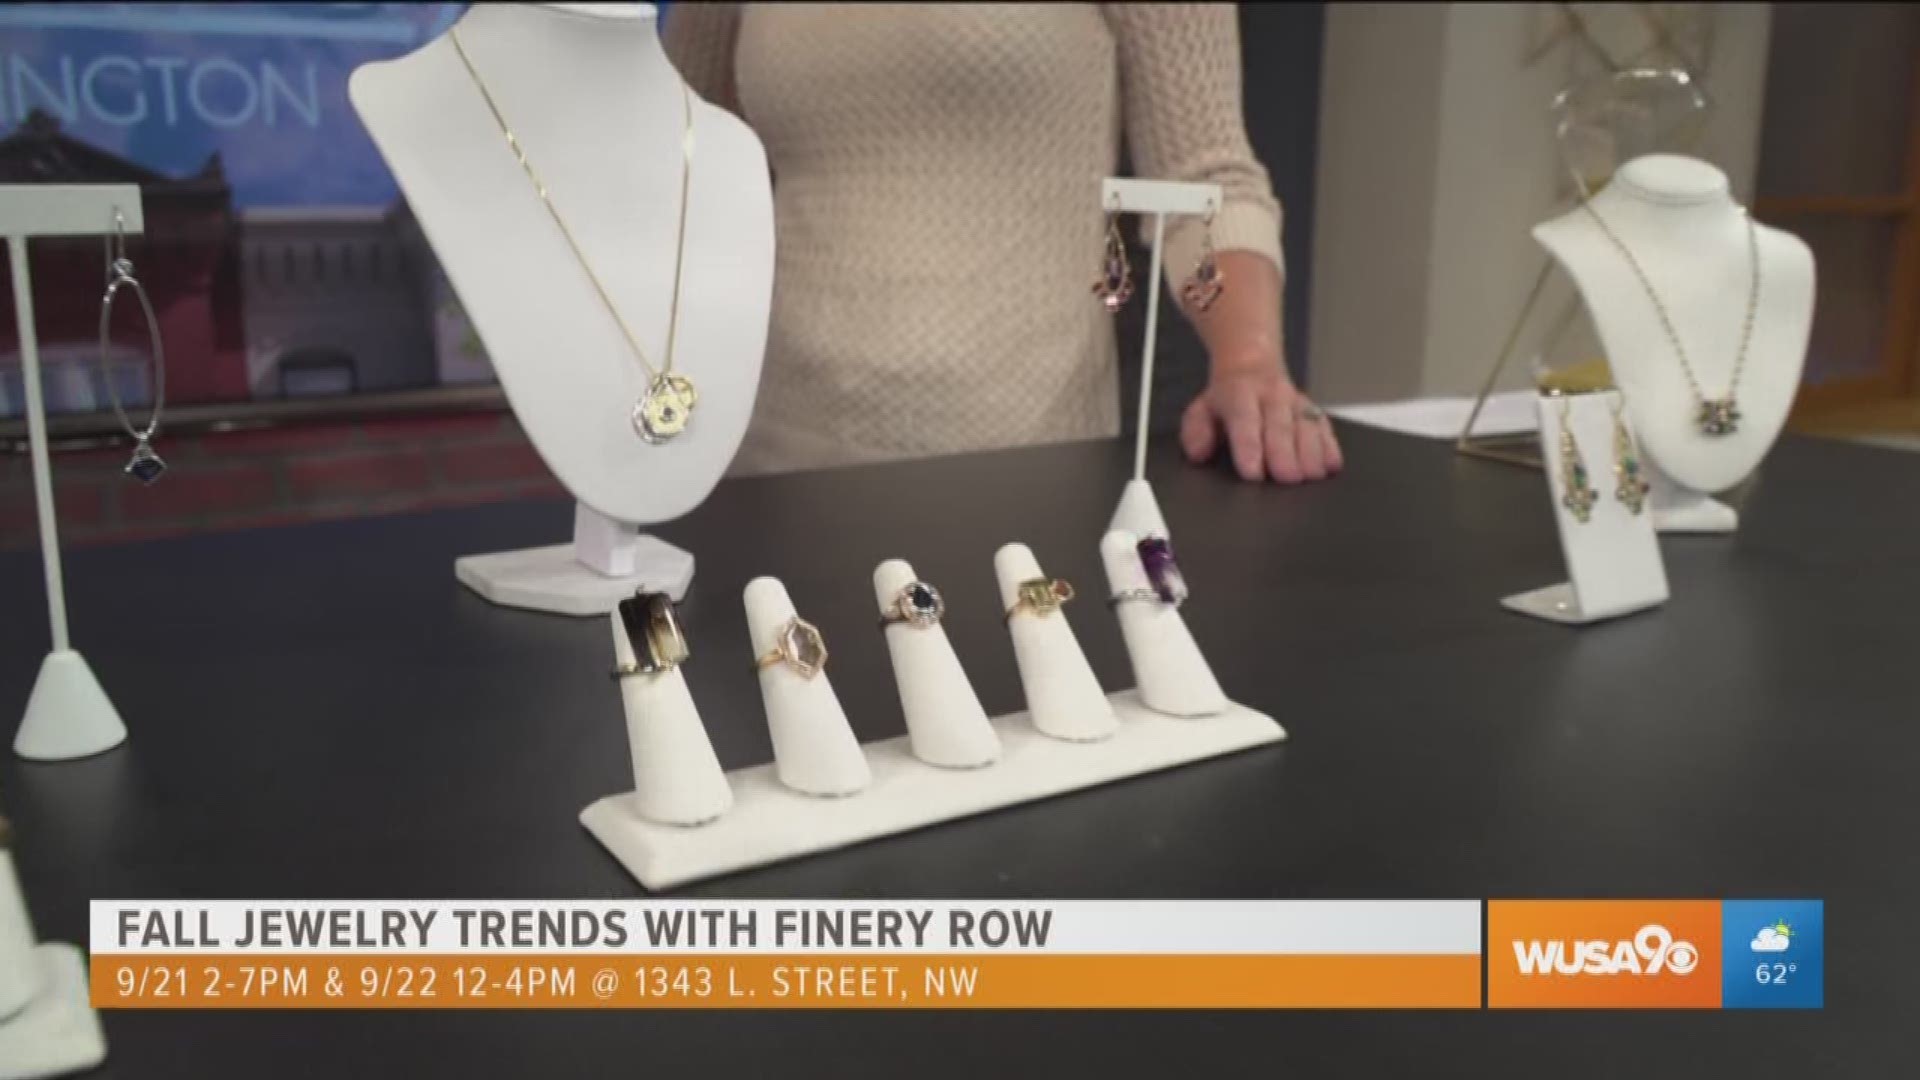 Benjamin Guttery, graduate gemologist shows us gorgeous jewelry pieces from Finery Row. On Sept. 21 & 22, Finery Row will host a pop-up shop at 1343 L St. NW.